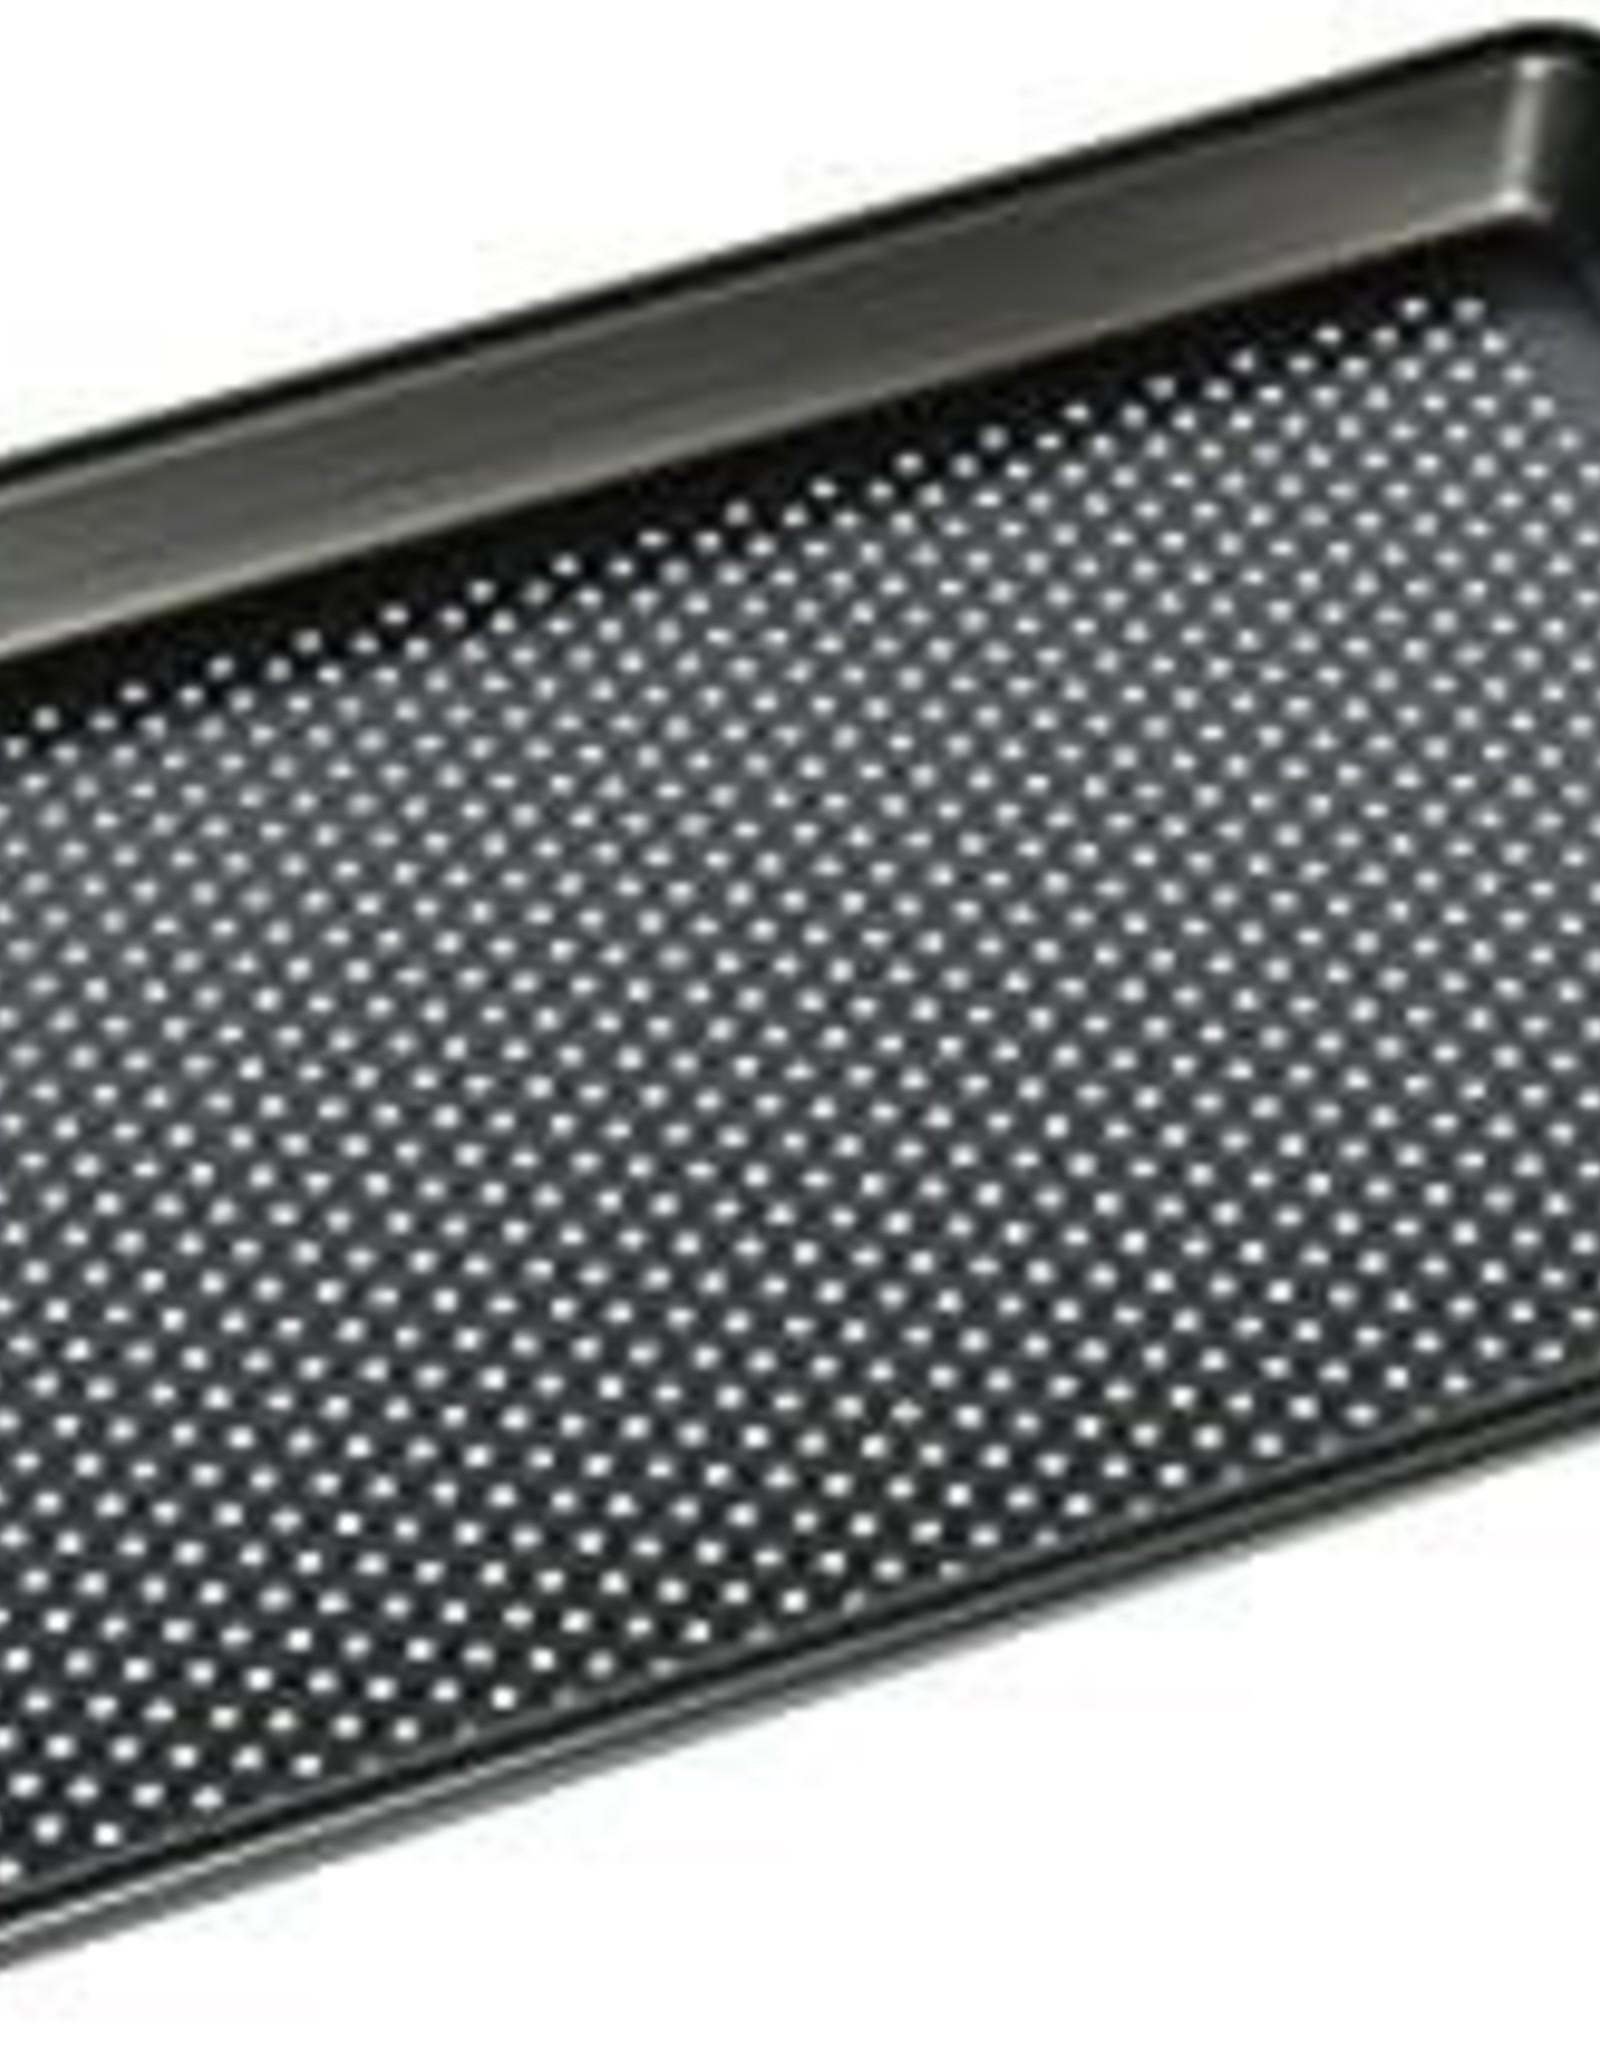 Perforated Jelly Roll Pan (10x15) - Sweet Baking Supply